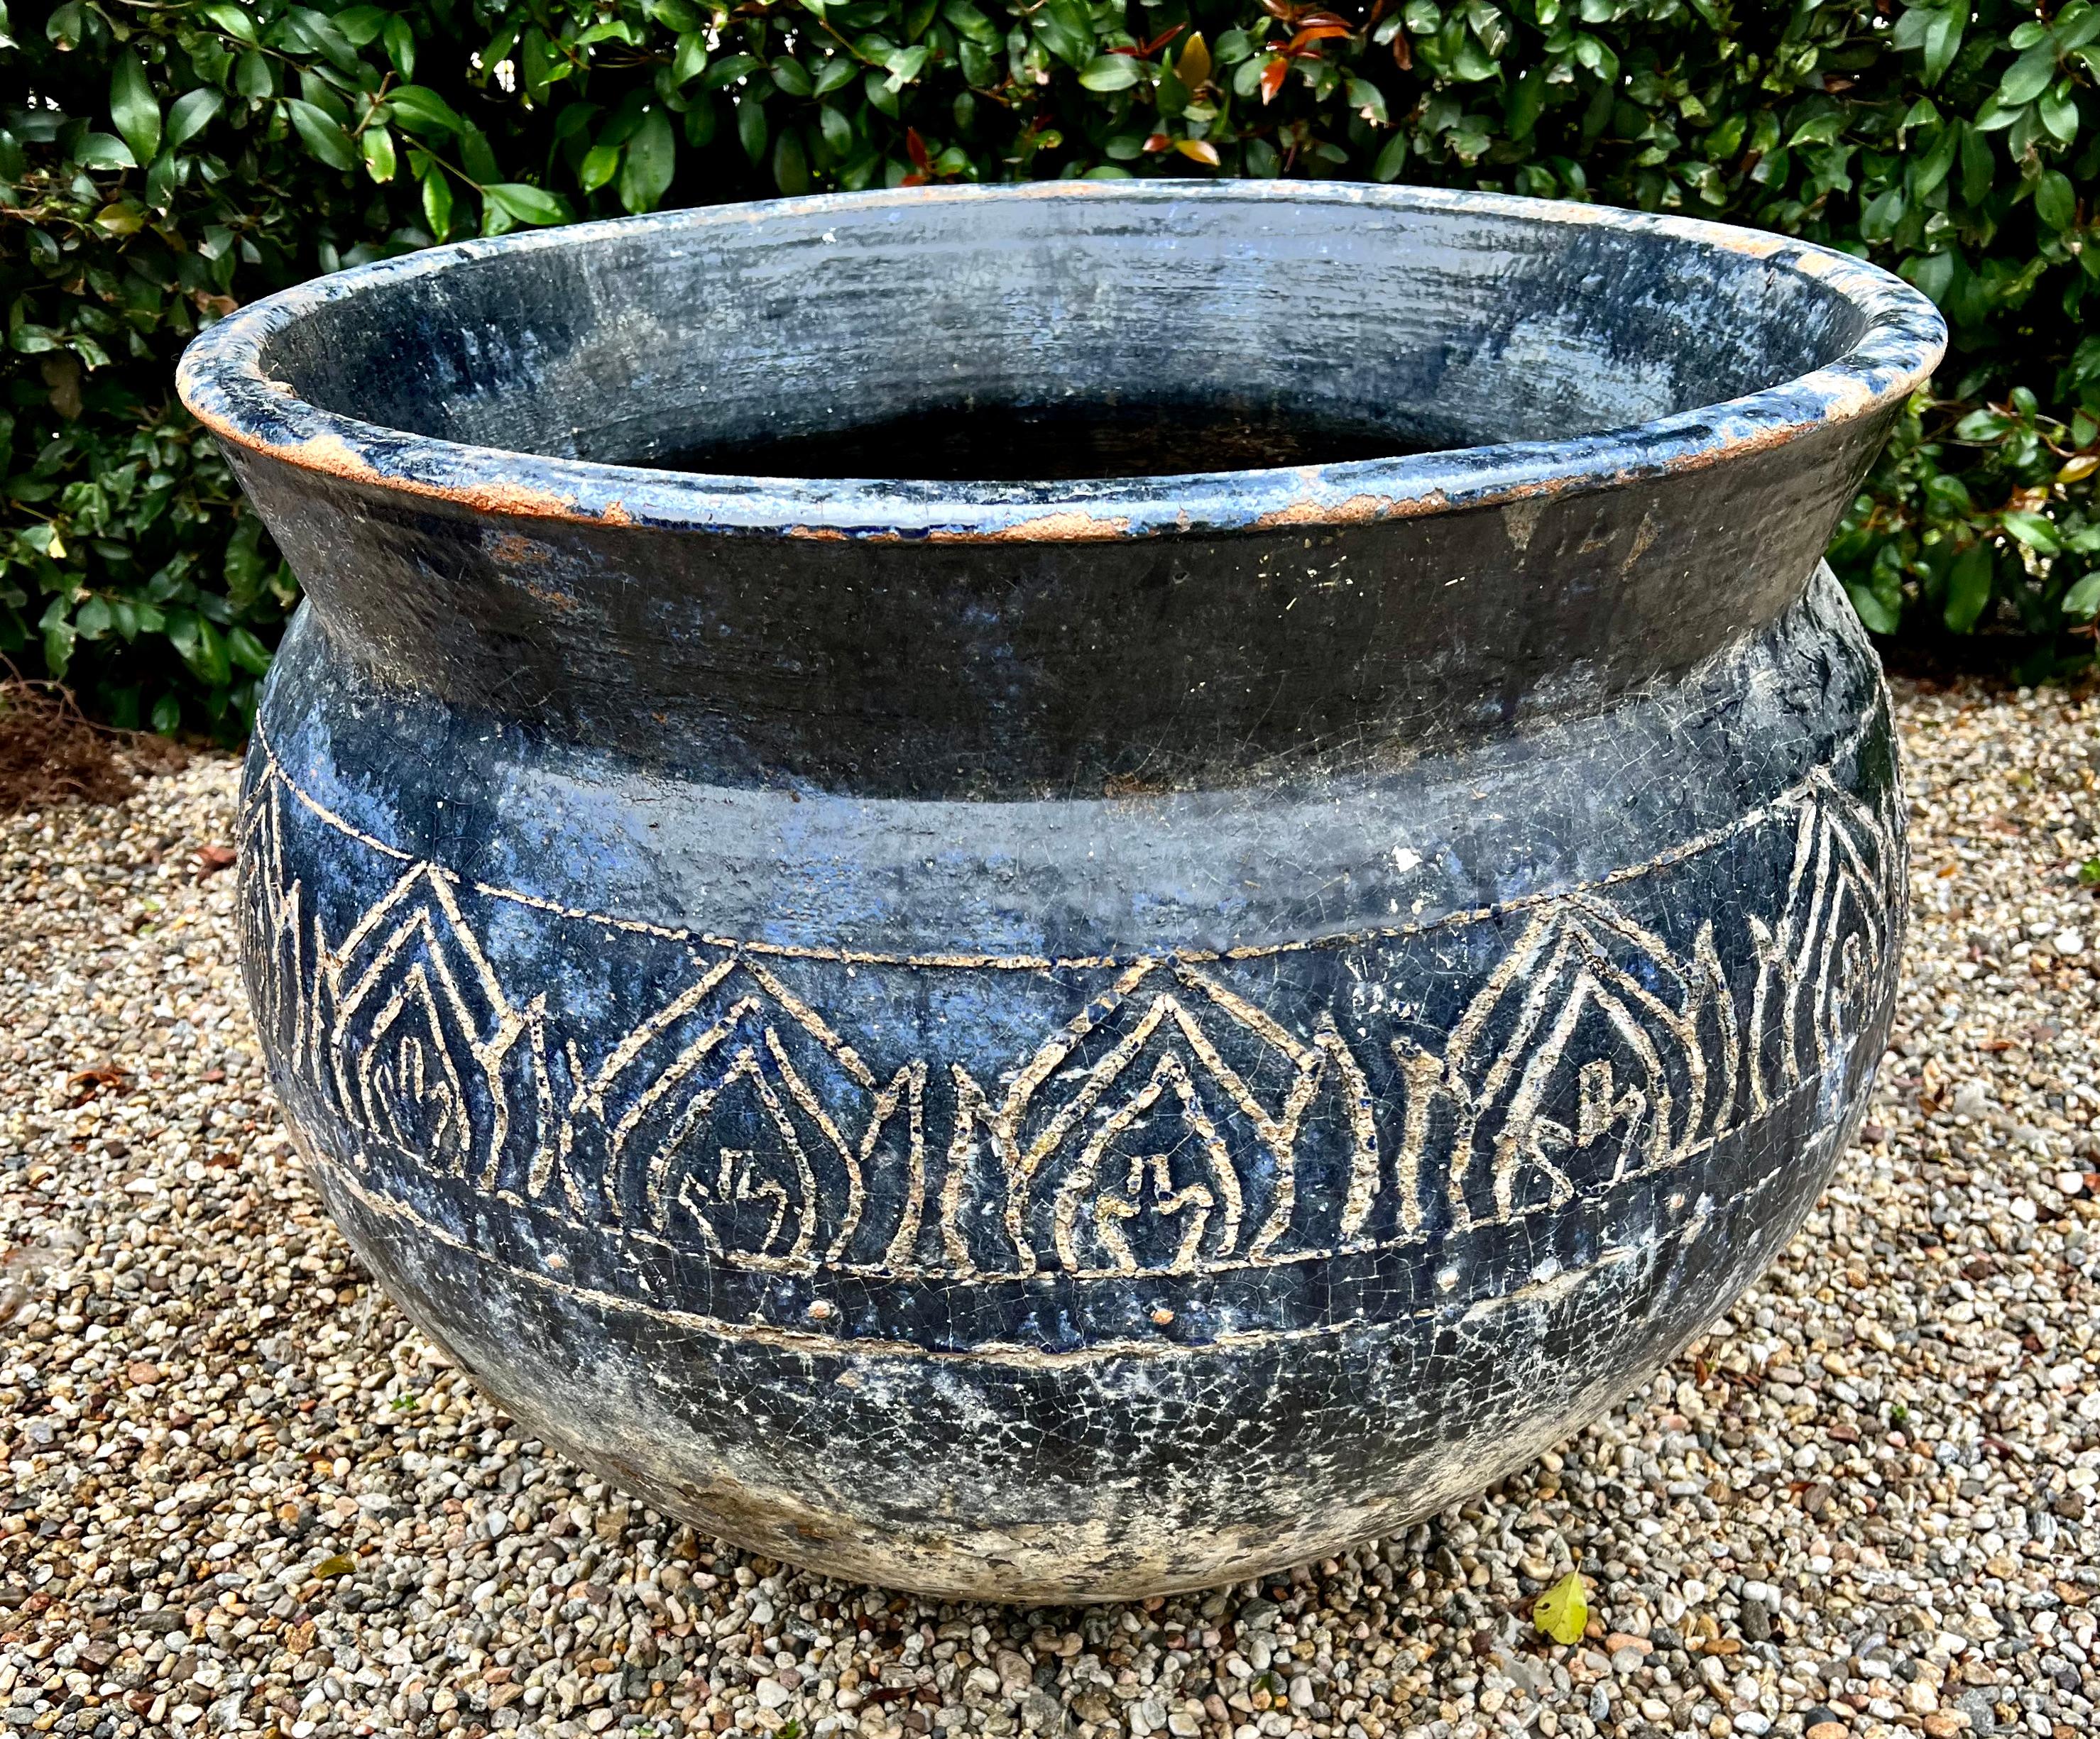 A very large terracotta Planter with patinated blue glaze and design work etched into the glaze. A perfect container for a tree or larger piece. The planter is of substantial weight and is very sturdy - 

A Compliment to many interior or exterior